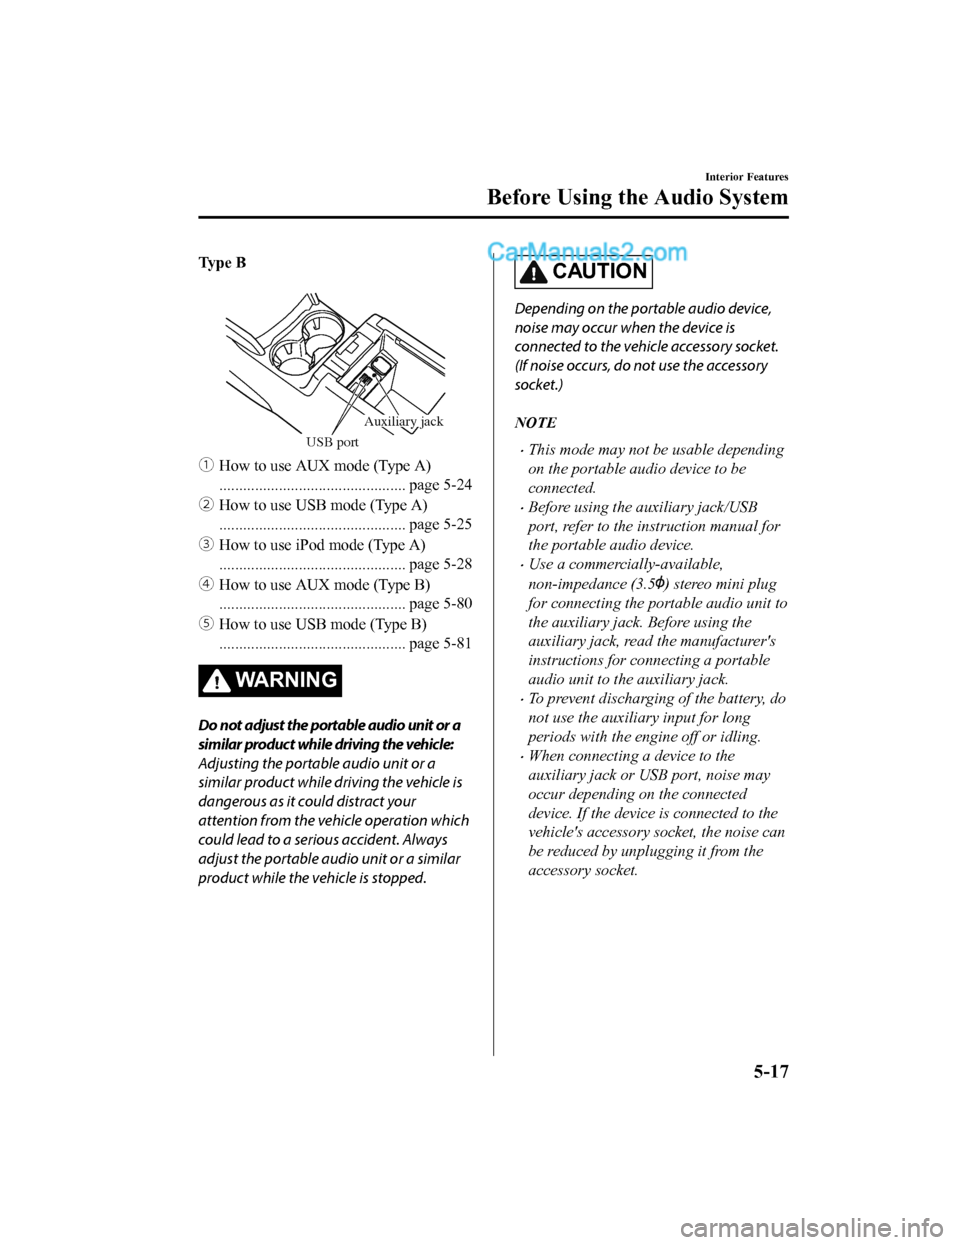 MAZDA MODEL CX-5 2018  Owners Manual (in English) Ty p e   B
 
USB port
Auxiliary jack
ƒHow to use AUX mode (Type A)
............................................... page 5-24
„ How to use USB mode (Type A)
.......................................